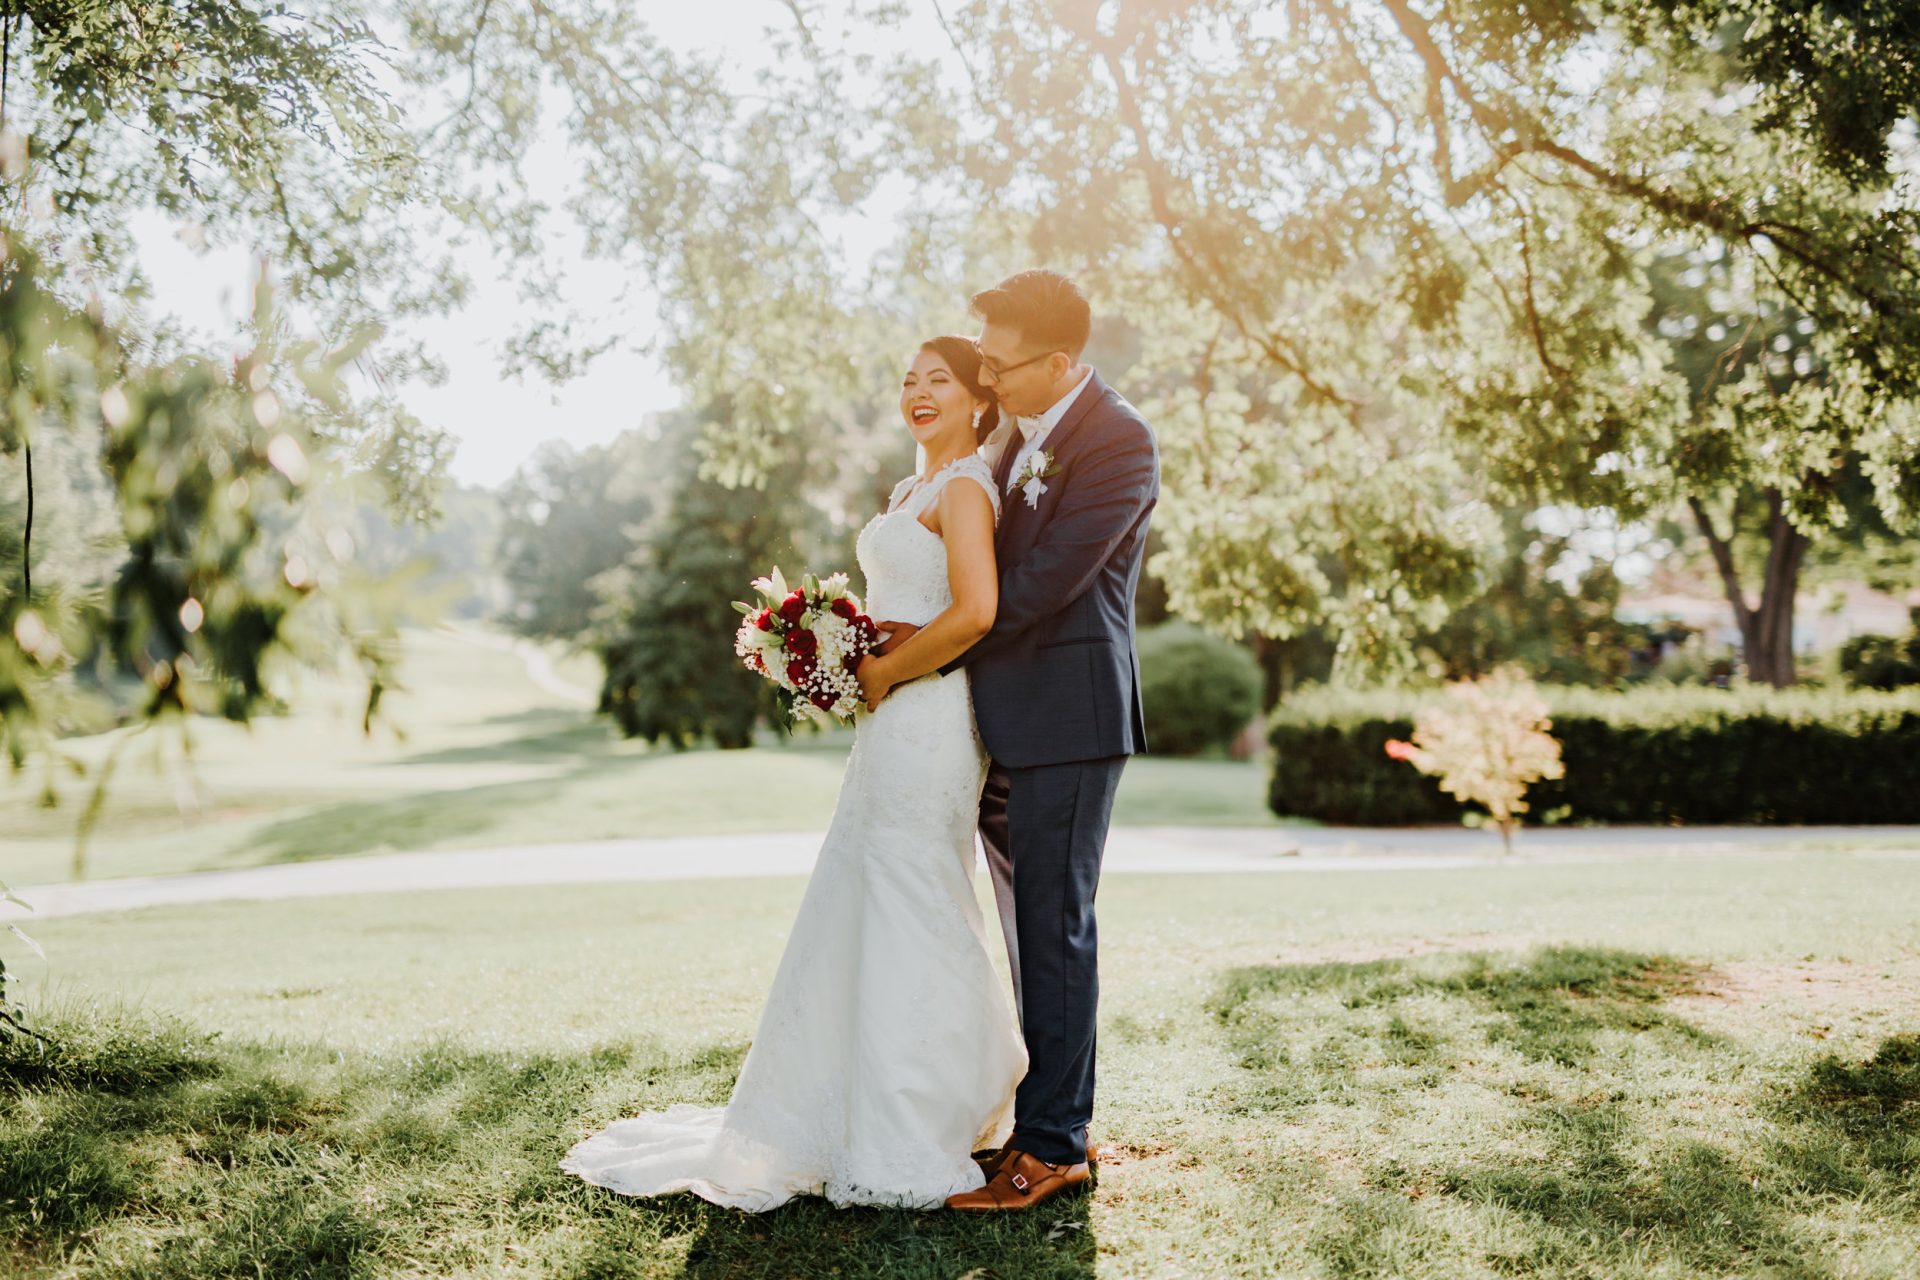 Expertly capture the joy of your wedding day with our Washington DC photographers